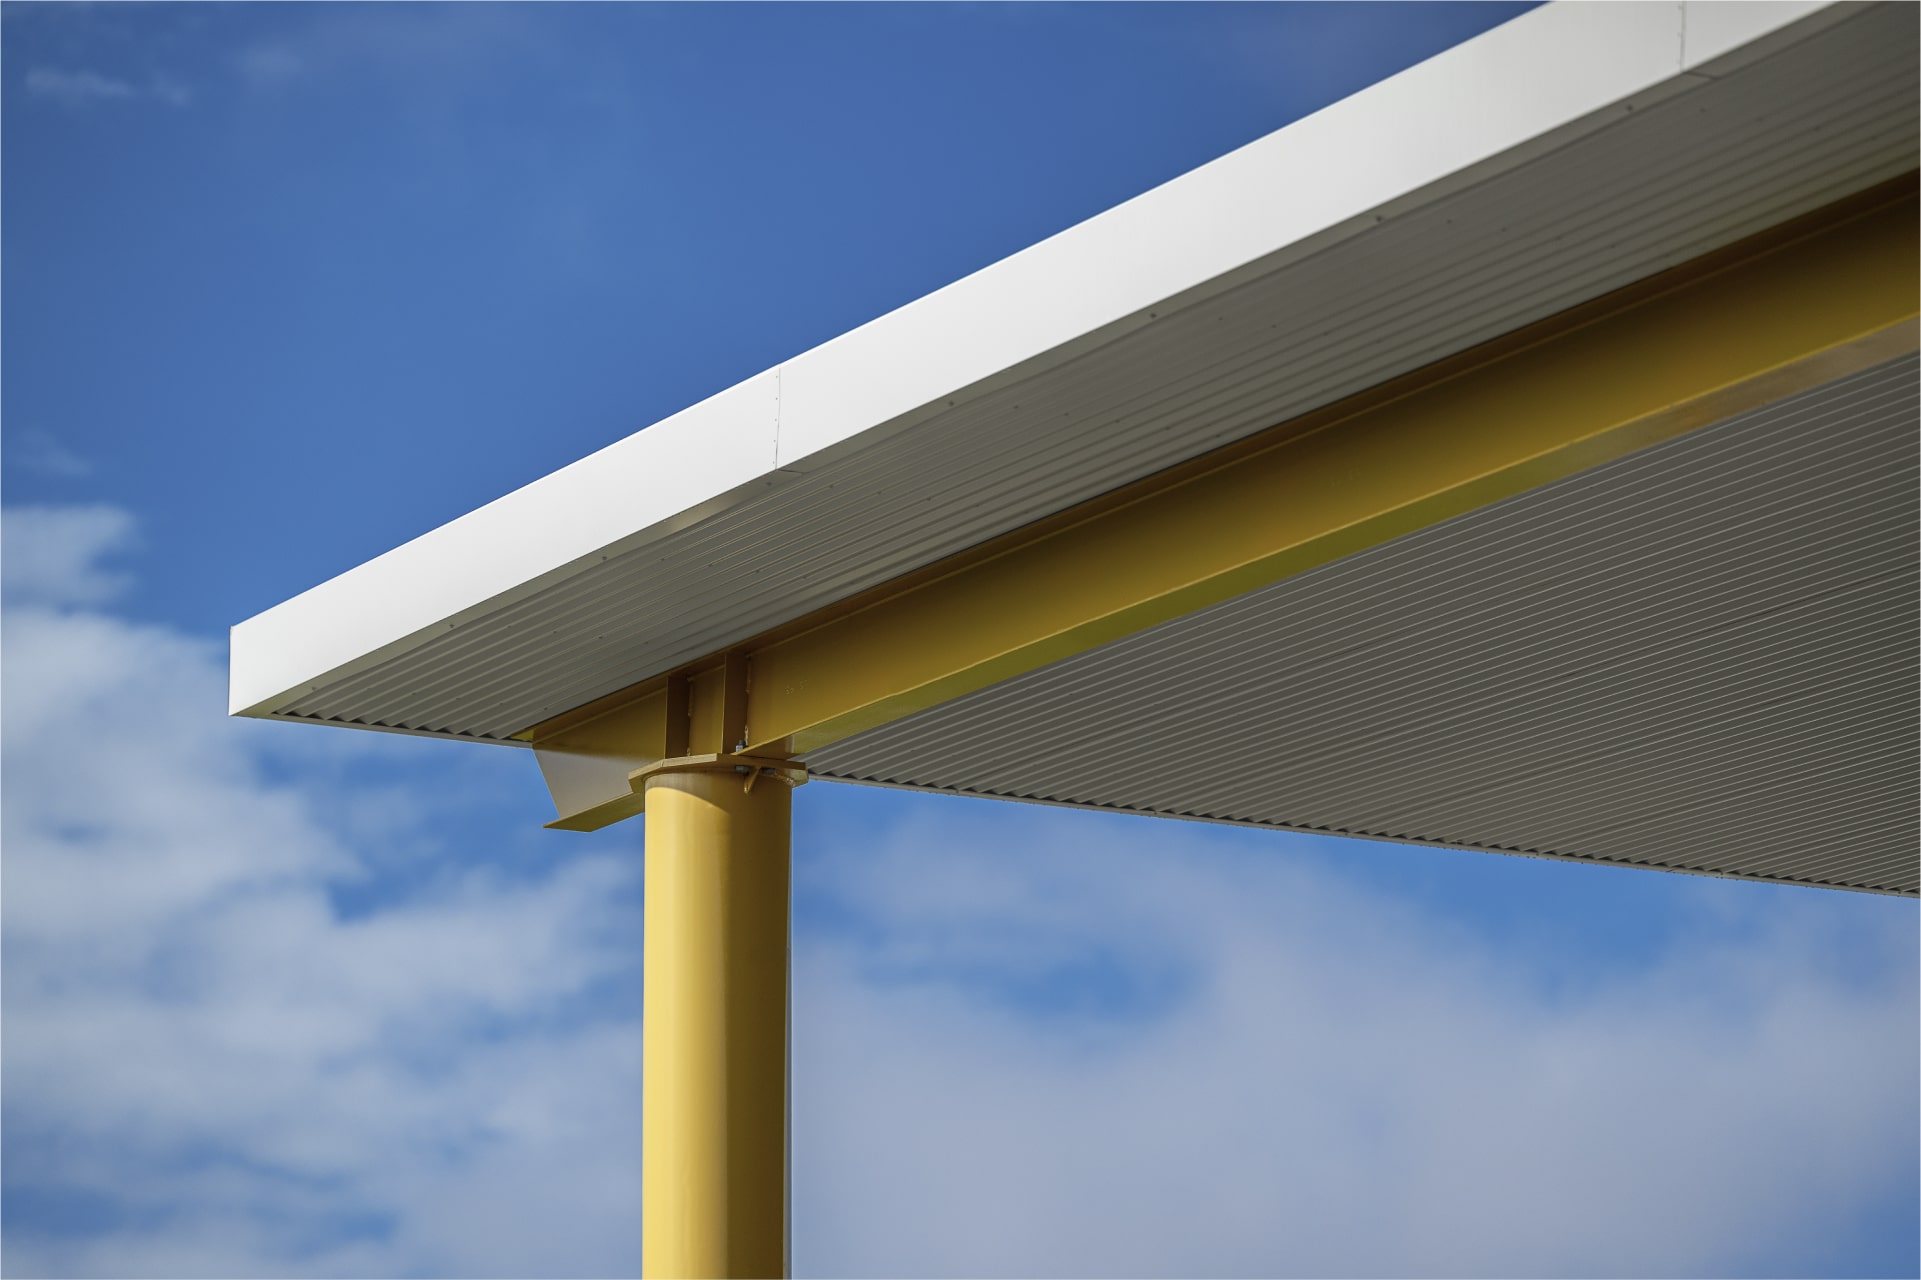 St Bernards Primary School steel court cover shade structure Soffit lining